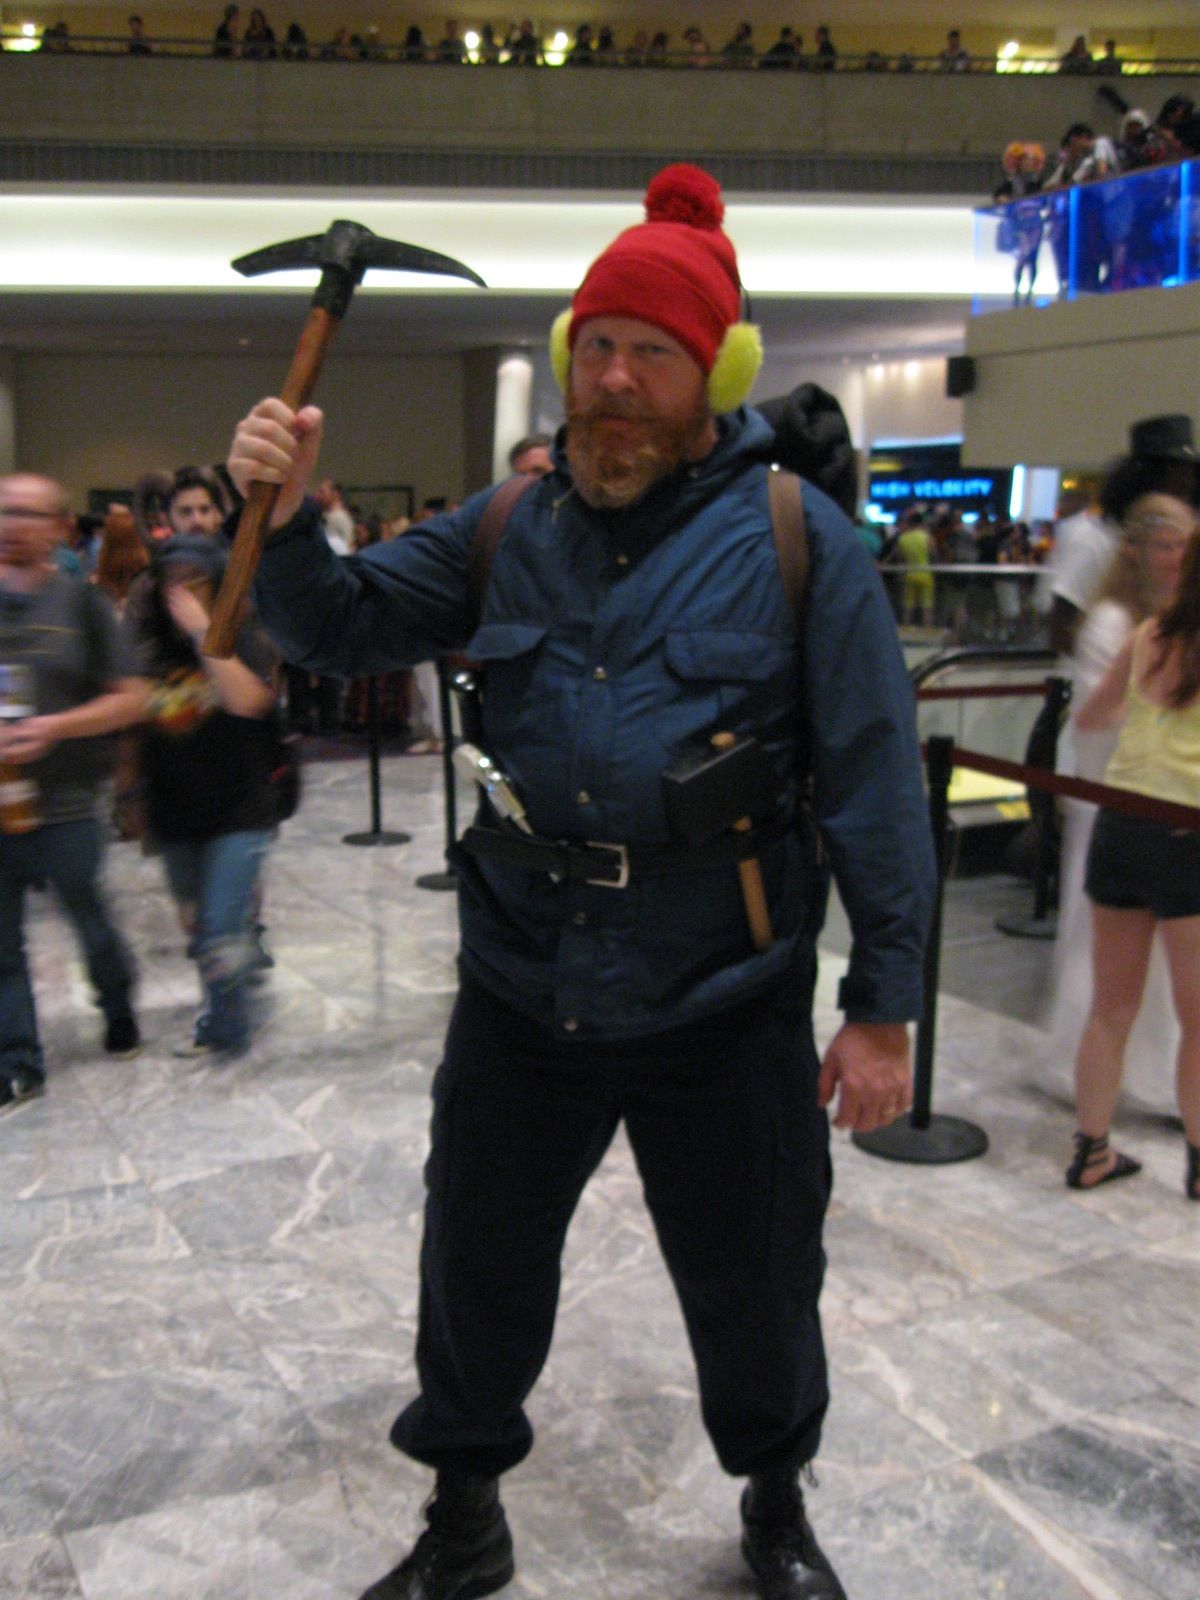 Over 60 Images of Dragon Con Cosplay 2014